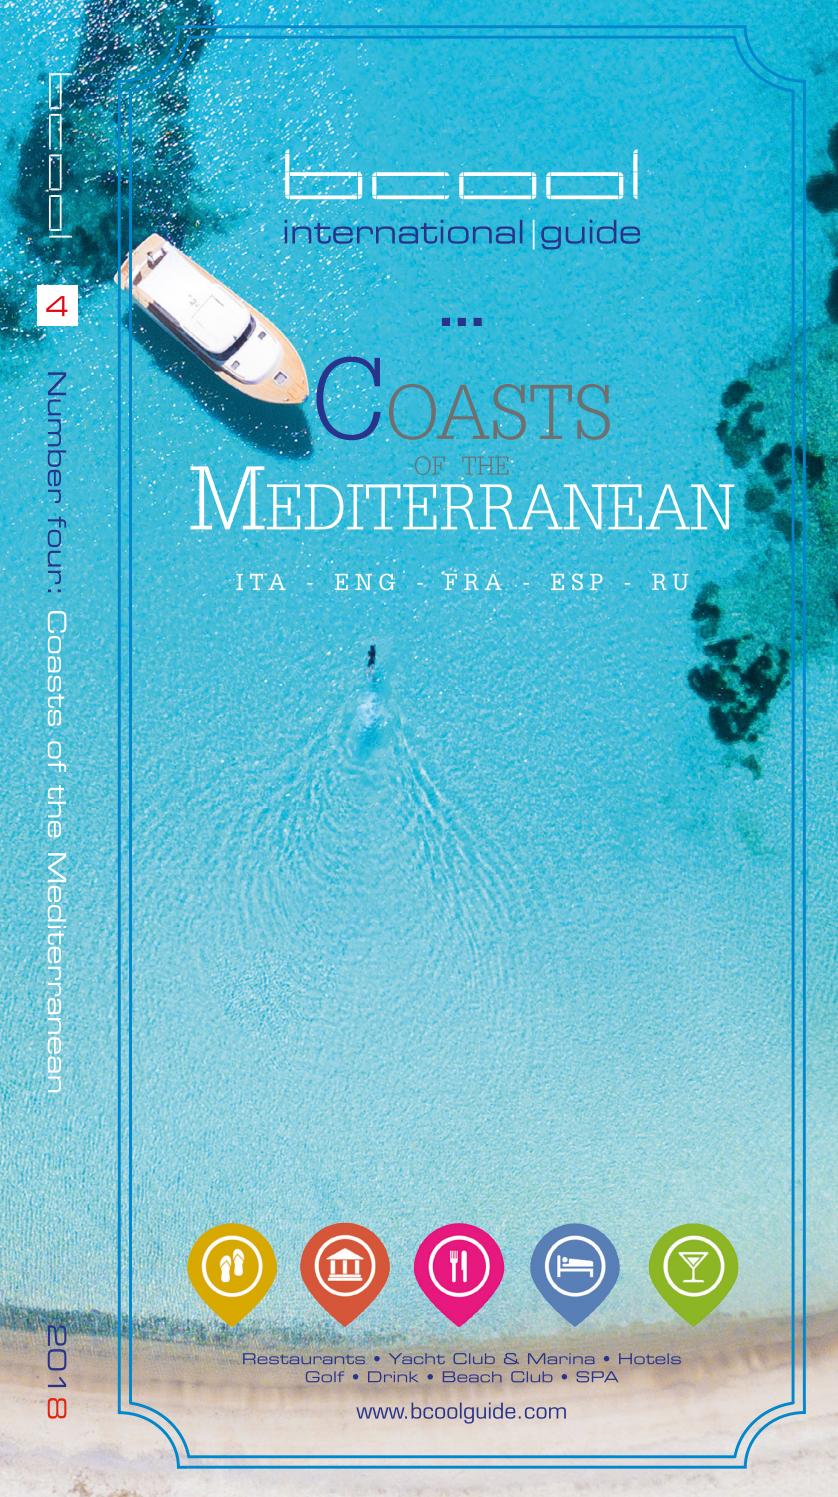 Salon De Jardin Angle Charmant 2018 Bcool Guide "coasts Of the Mediterrean" by Bcool City